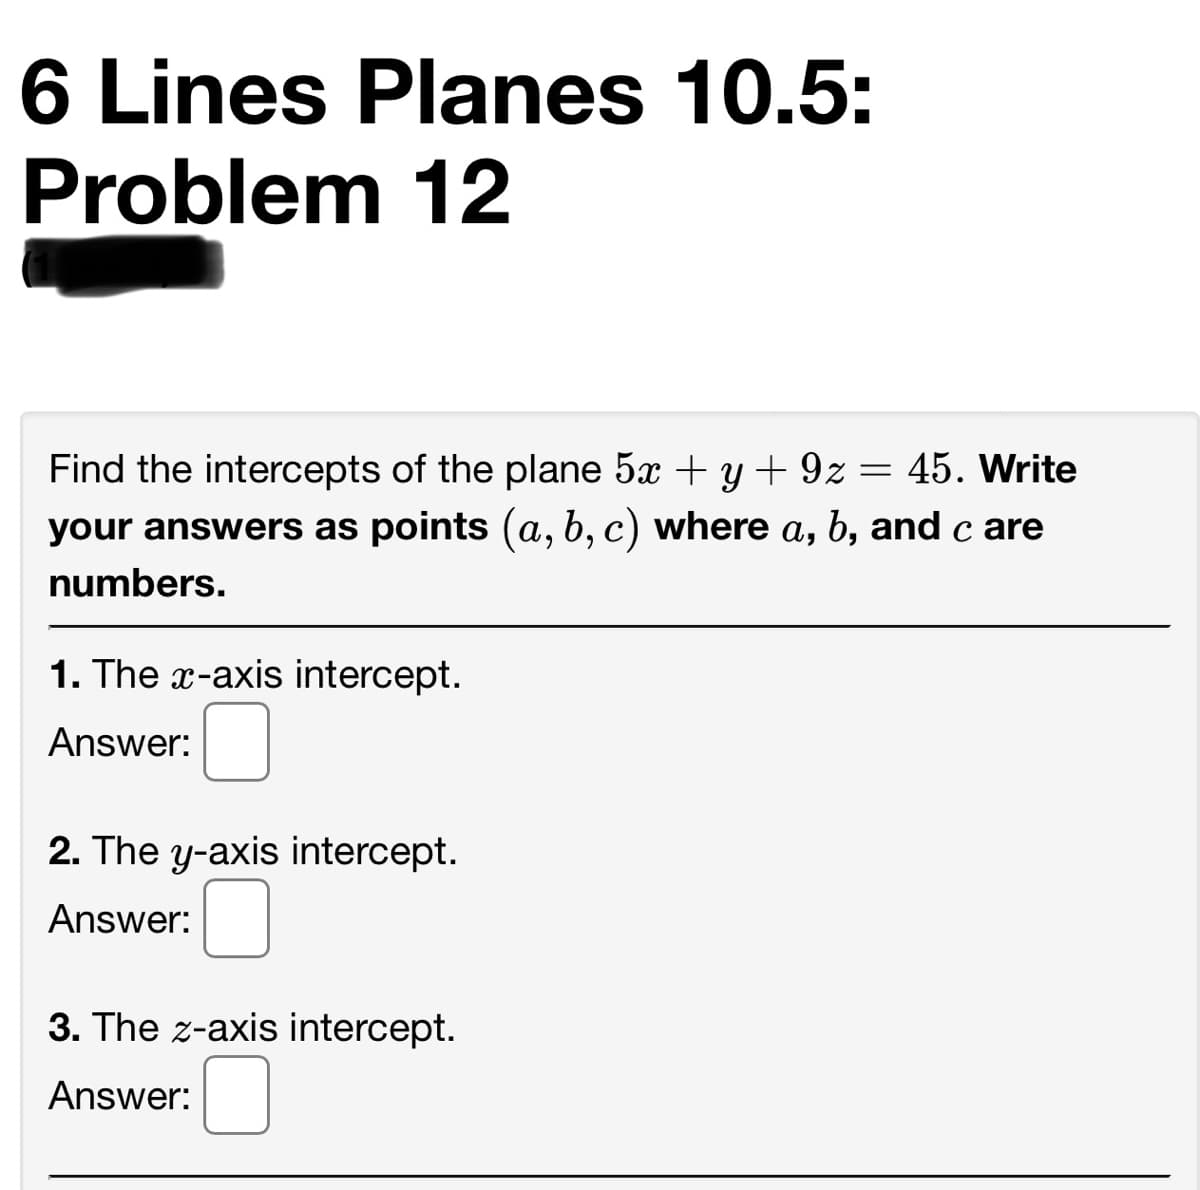 6 Lines Planes 10.5:
Problem 12
Find the intercepts of the plane 5x + y + 9z:
= 45. Write
your answers as points (a, b, c) where a, b, and c are
numbers.
1. The x-axis intercept.
Answer:
2. The y-axis intercept.
Answer:
3. The z-axis intercept.
Answer:
